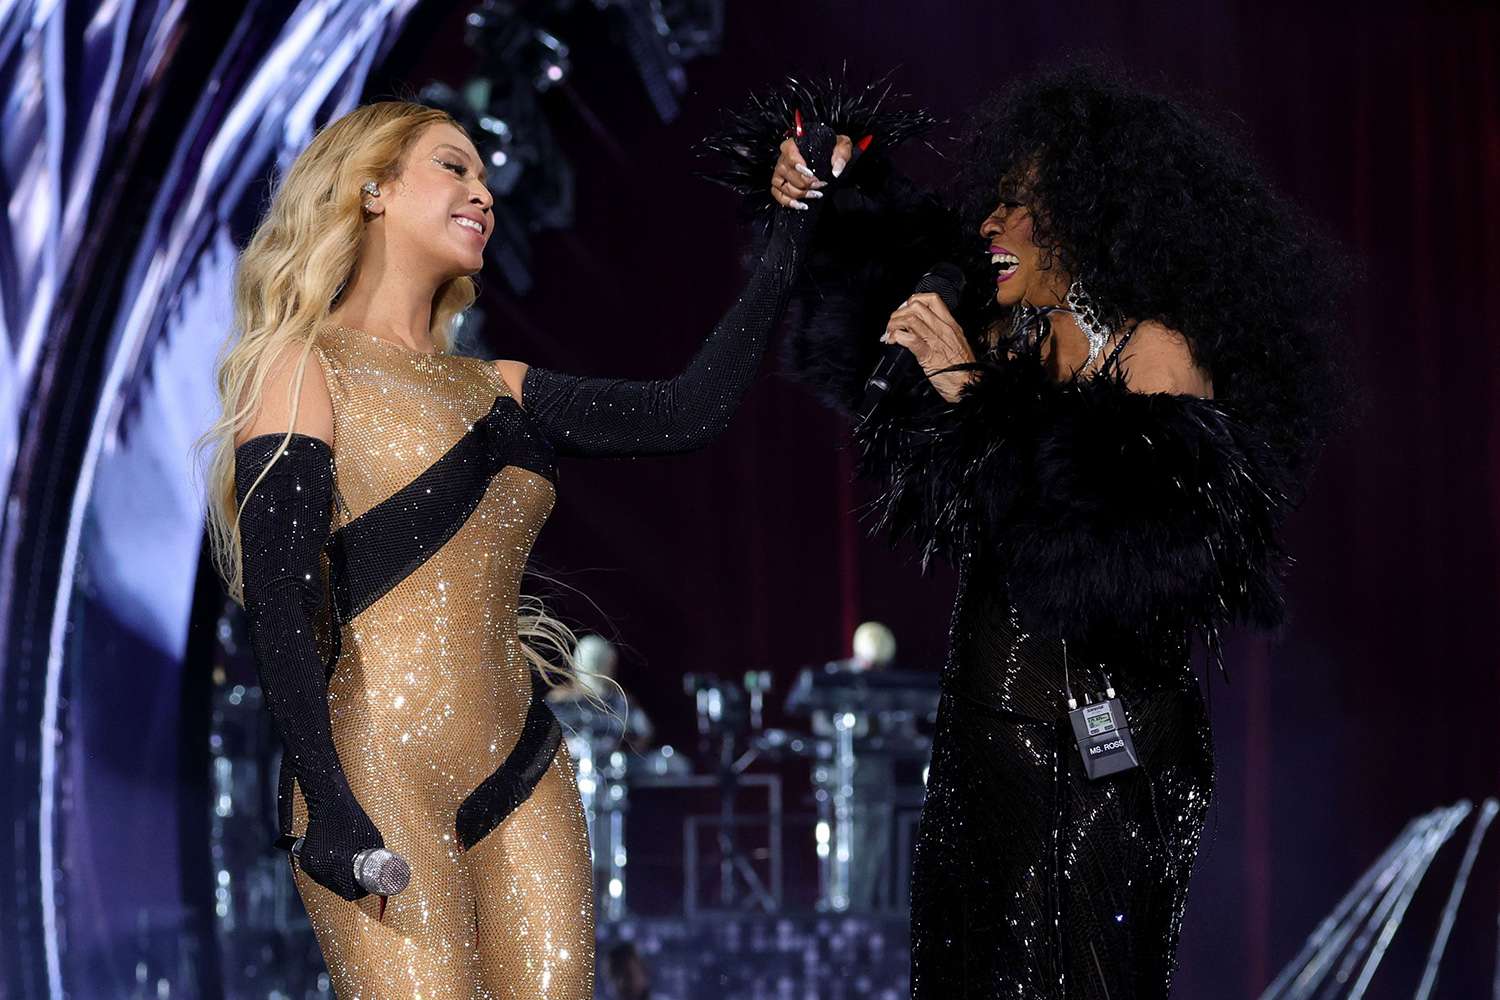 (Exclusive Coverage) (L-R) Beyonce and Diana Ross perform onstage during the "RENAISSANCE WORLD TOUR" at SoFi Stadium 